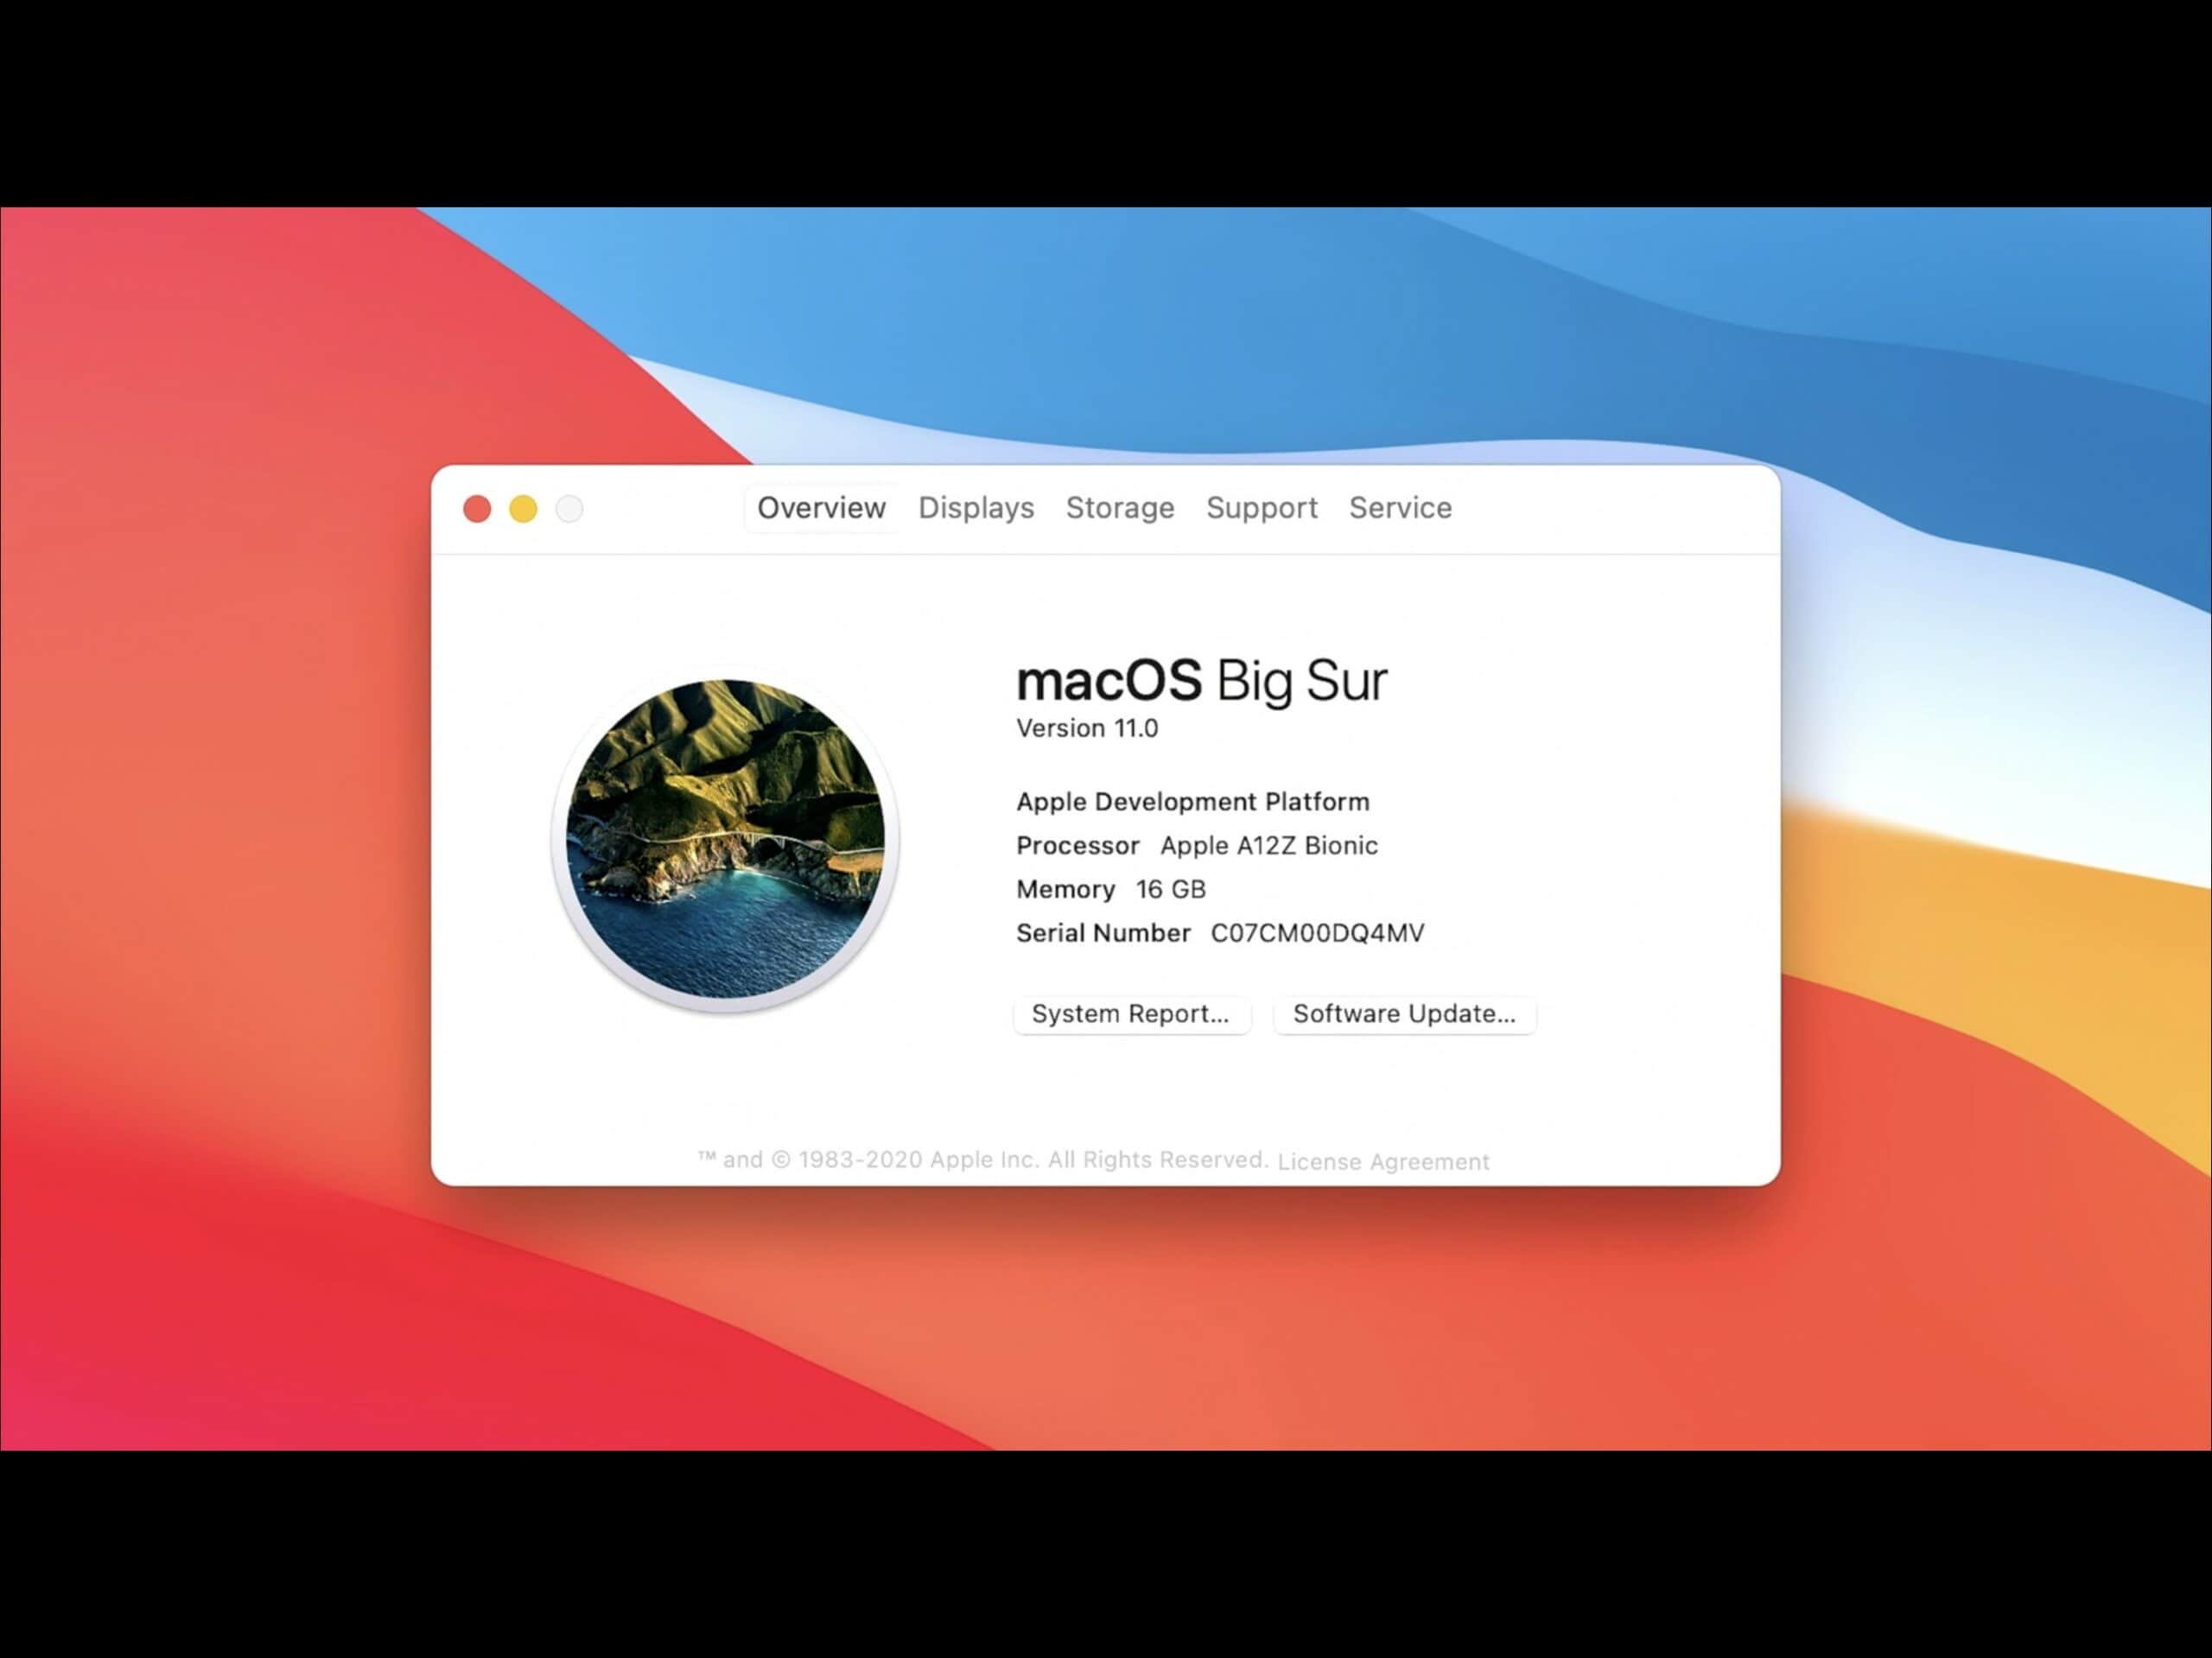 MacOS Big Sur turns the Mac operating system up to 11.